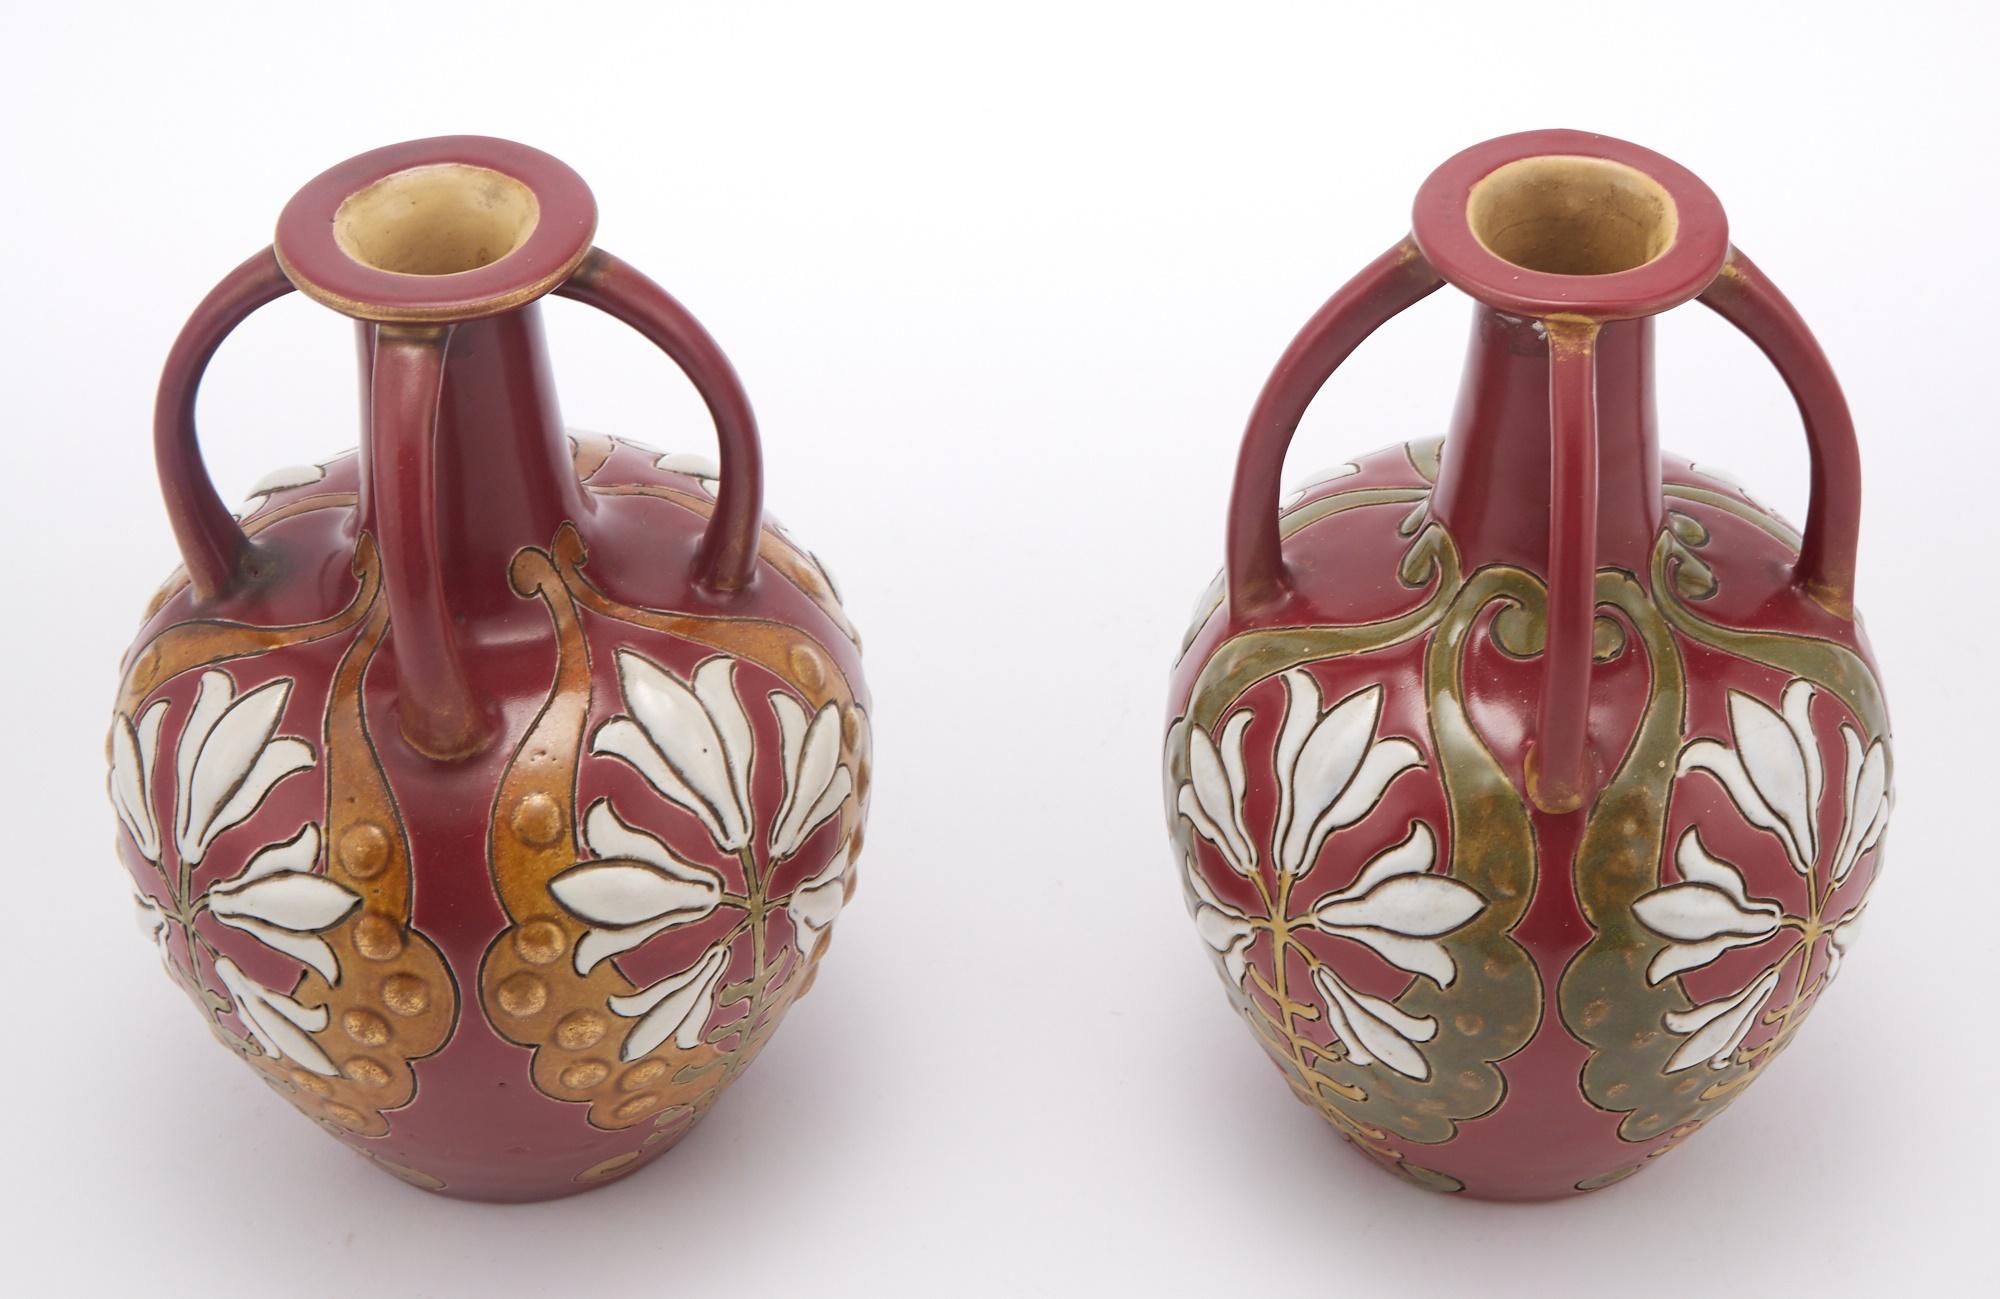 Immerse your surroundings in the charm of the mid-20th century with our Hand-Painted Pair of Decorative Pottery Vases. Crafted with artistic finesse, each vase boasts a distinctive bottle-shaped neck adorned with four attached side handles, adding a